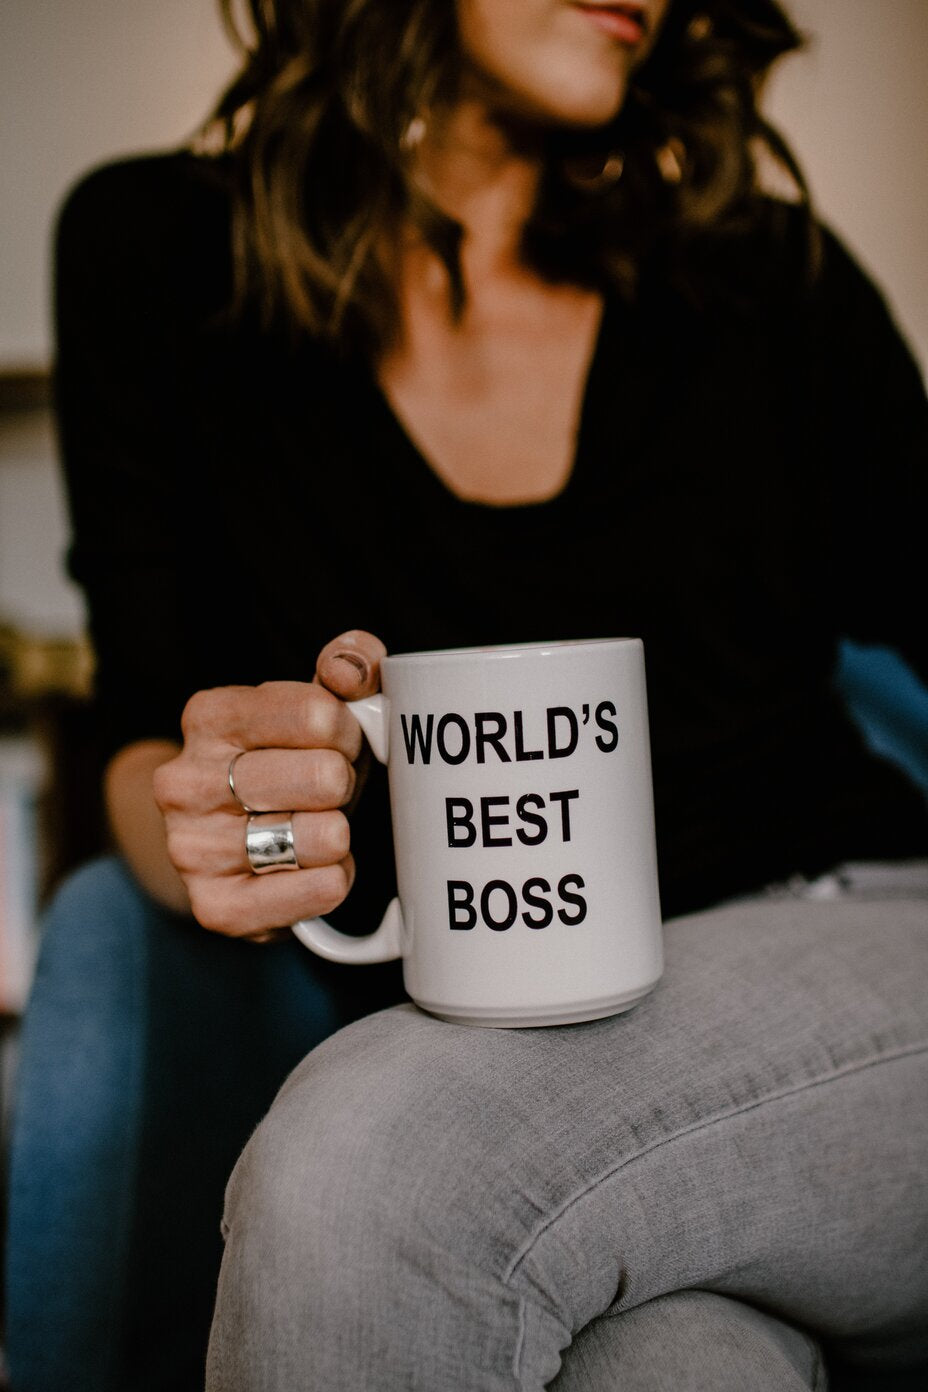 How To Be A Great Boss